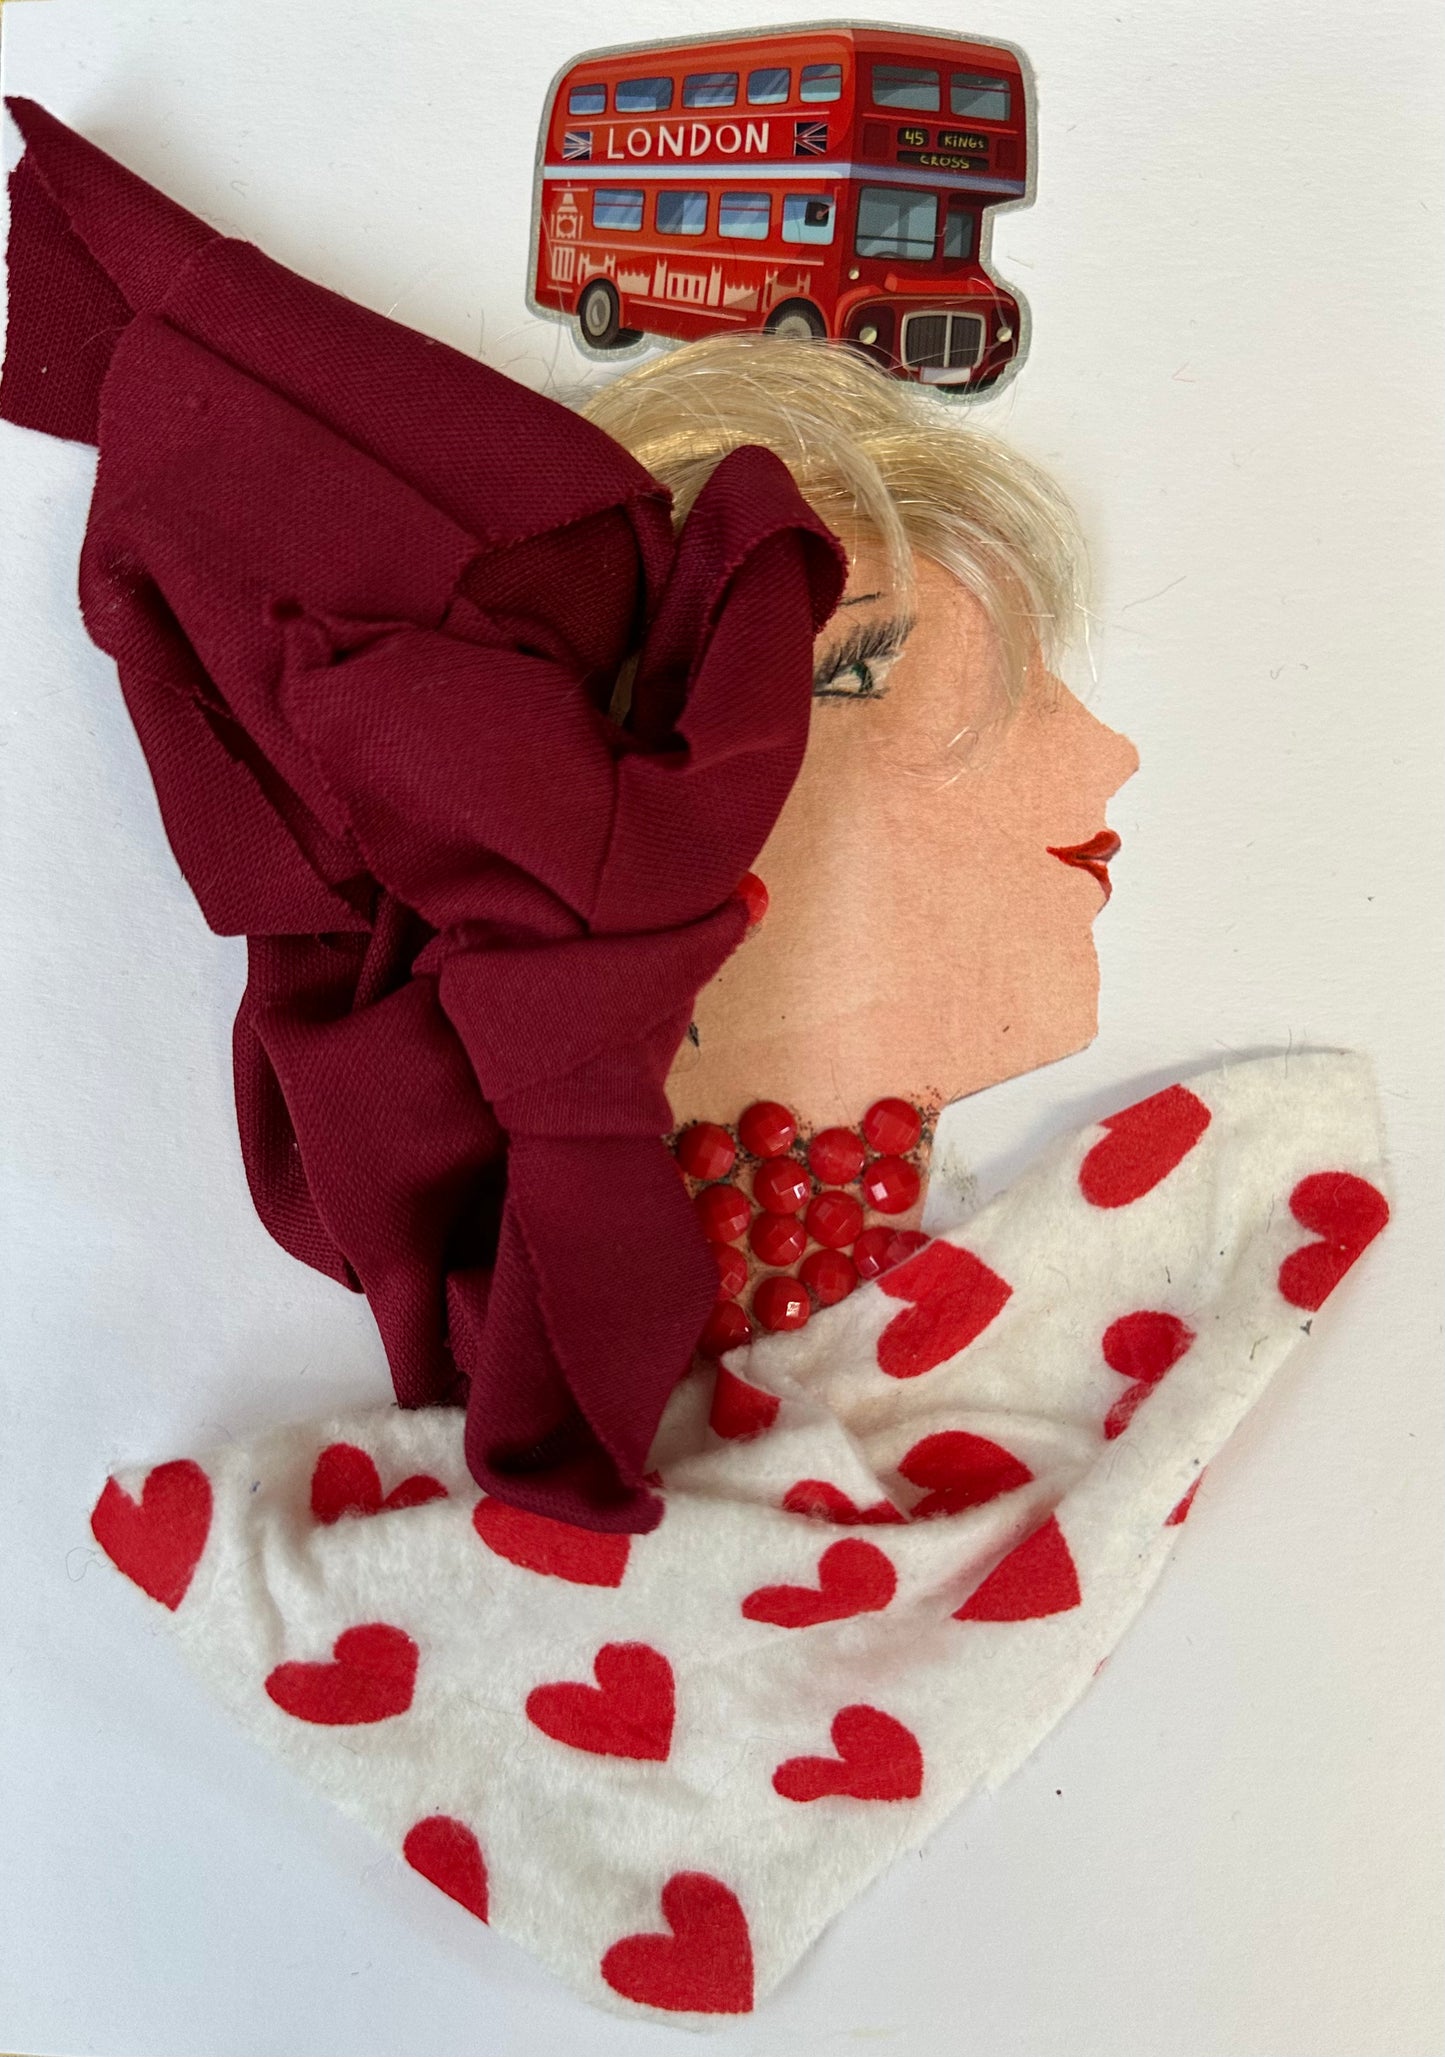 I designed this handmade card of a woman dressed in a white blouse with red hearts. She has a dark red hatinator and a necklace made up of bright red gemstones. Above her head is a double-decker red bus.